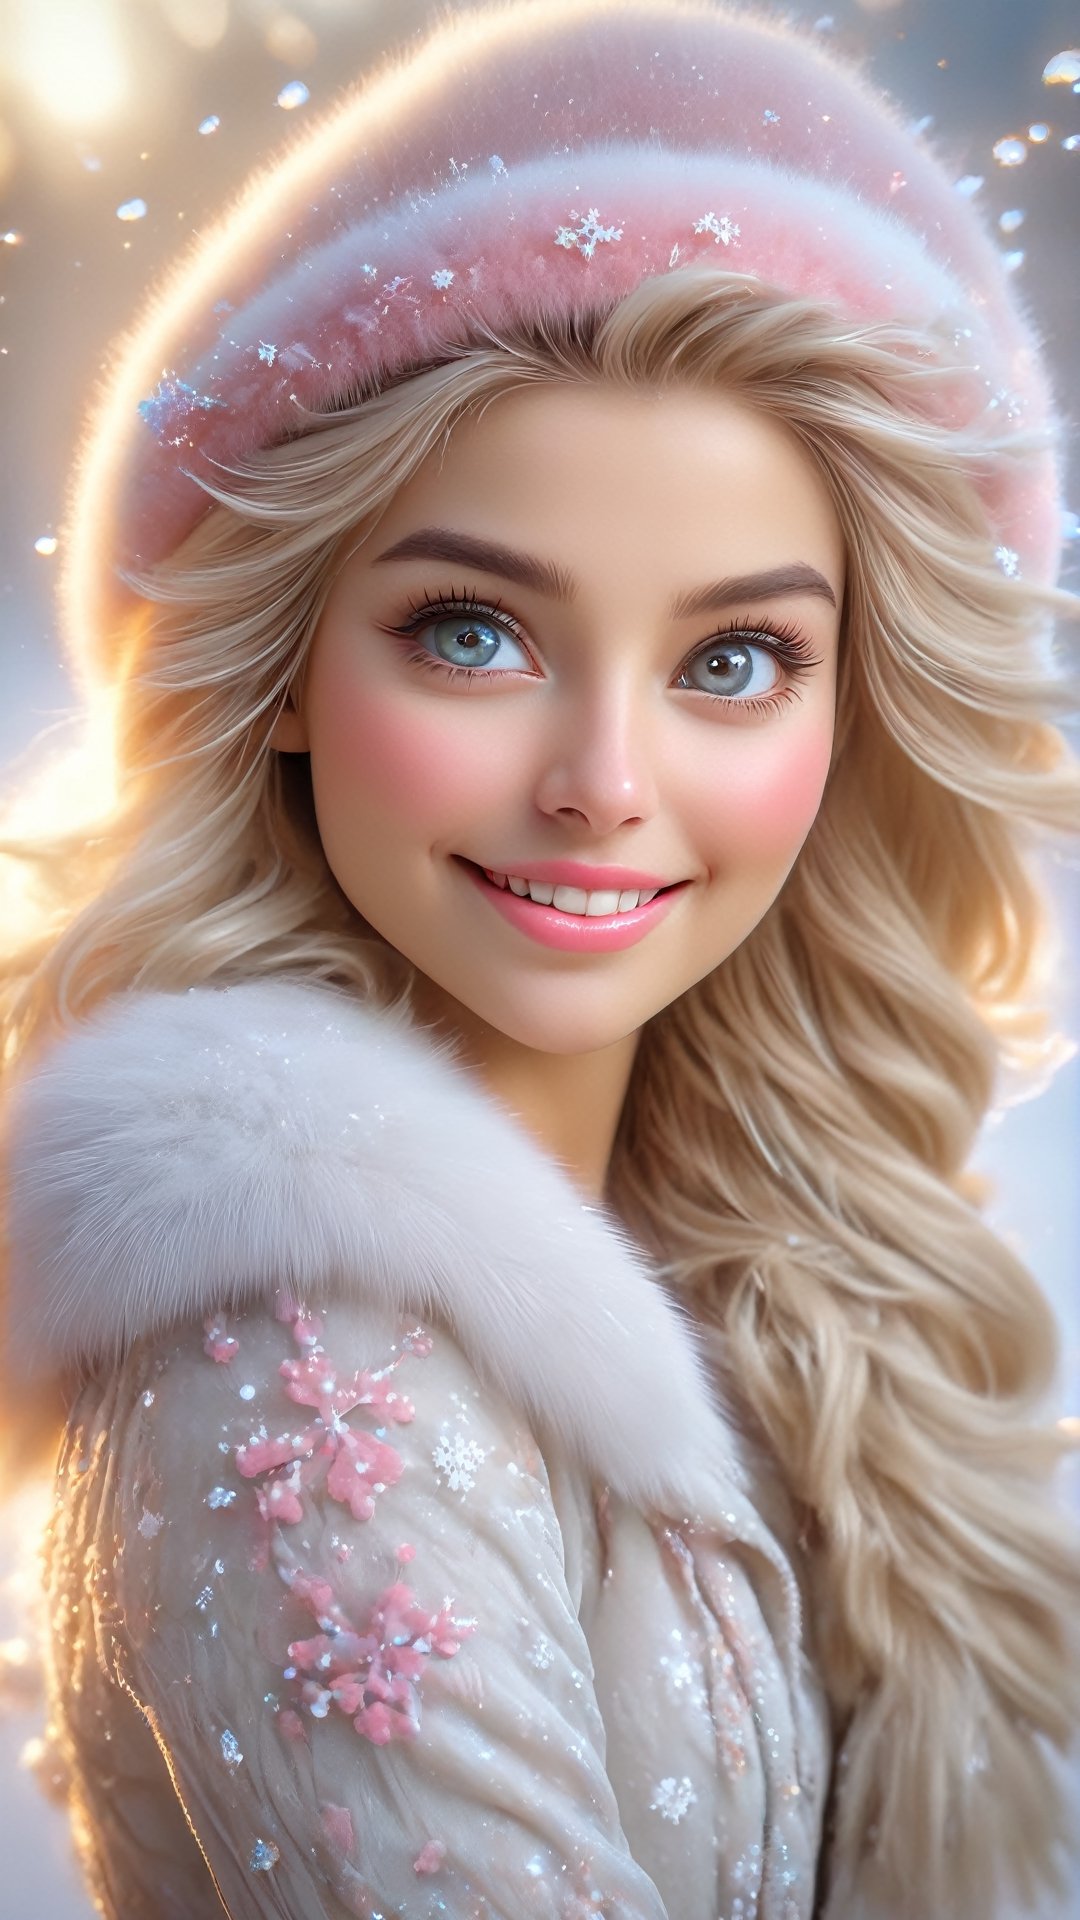 (best quality, 4k, 8k, highres, masterpiece:1.2), ultra-detailed, (realistic, photorealistic, photo-realistic:1.37), portrait, beautiful and smiling caucasian woman, cinematic, winter clothes, Ondas e Nuances, detailed symmetric hazel eyes, circular iris, vivid colors, winter scenery, soft snowflakes falling, icy breath, rosy cheeks, pure white background, subtle warm lighting, innocence and radiance, sparkling eyes, joyful expression, luxurious fur trim on the clothing, frosty winter air, subtle wind blowing through her hair, subtle hint of pink in her lips, elegant posture, confident stance, delicate snowflakes decorating her hair, long flowing blonde hair, wonder and serenity in her gaze, captivating beauty, snow-covered trees in the background, peaceful and enchanting winter scene.